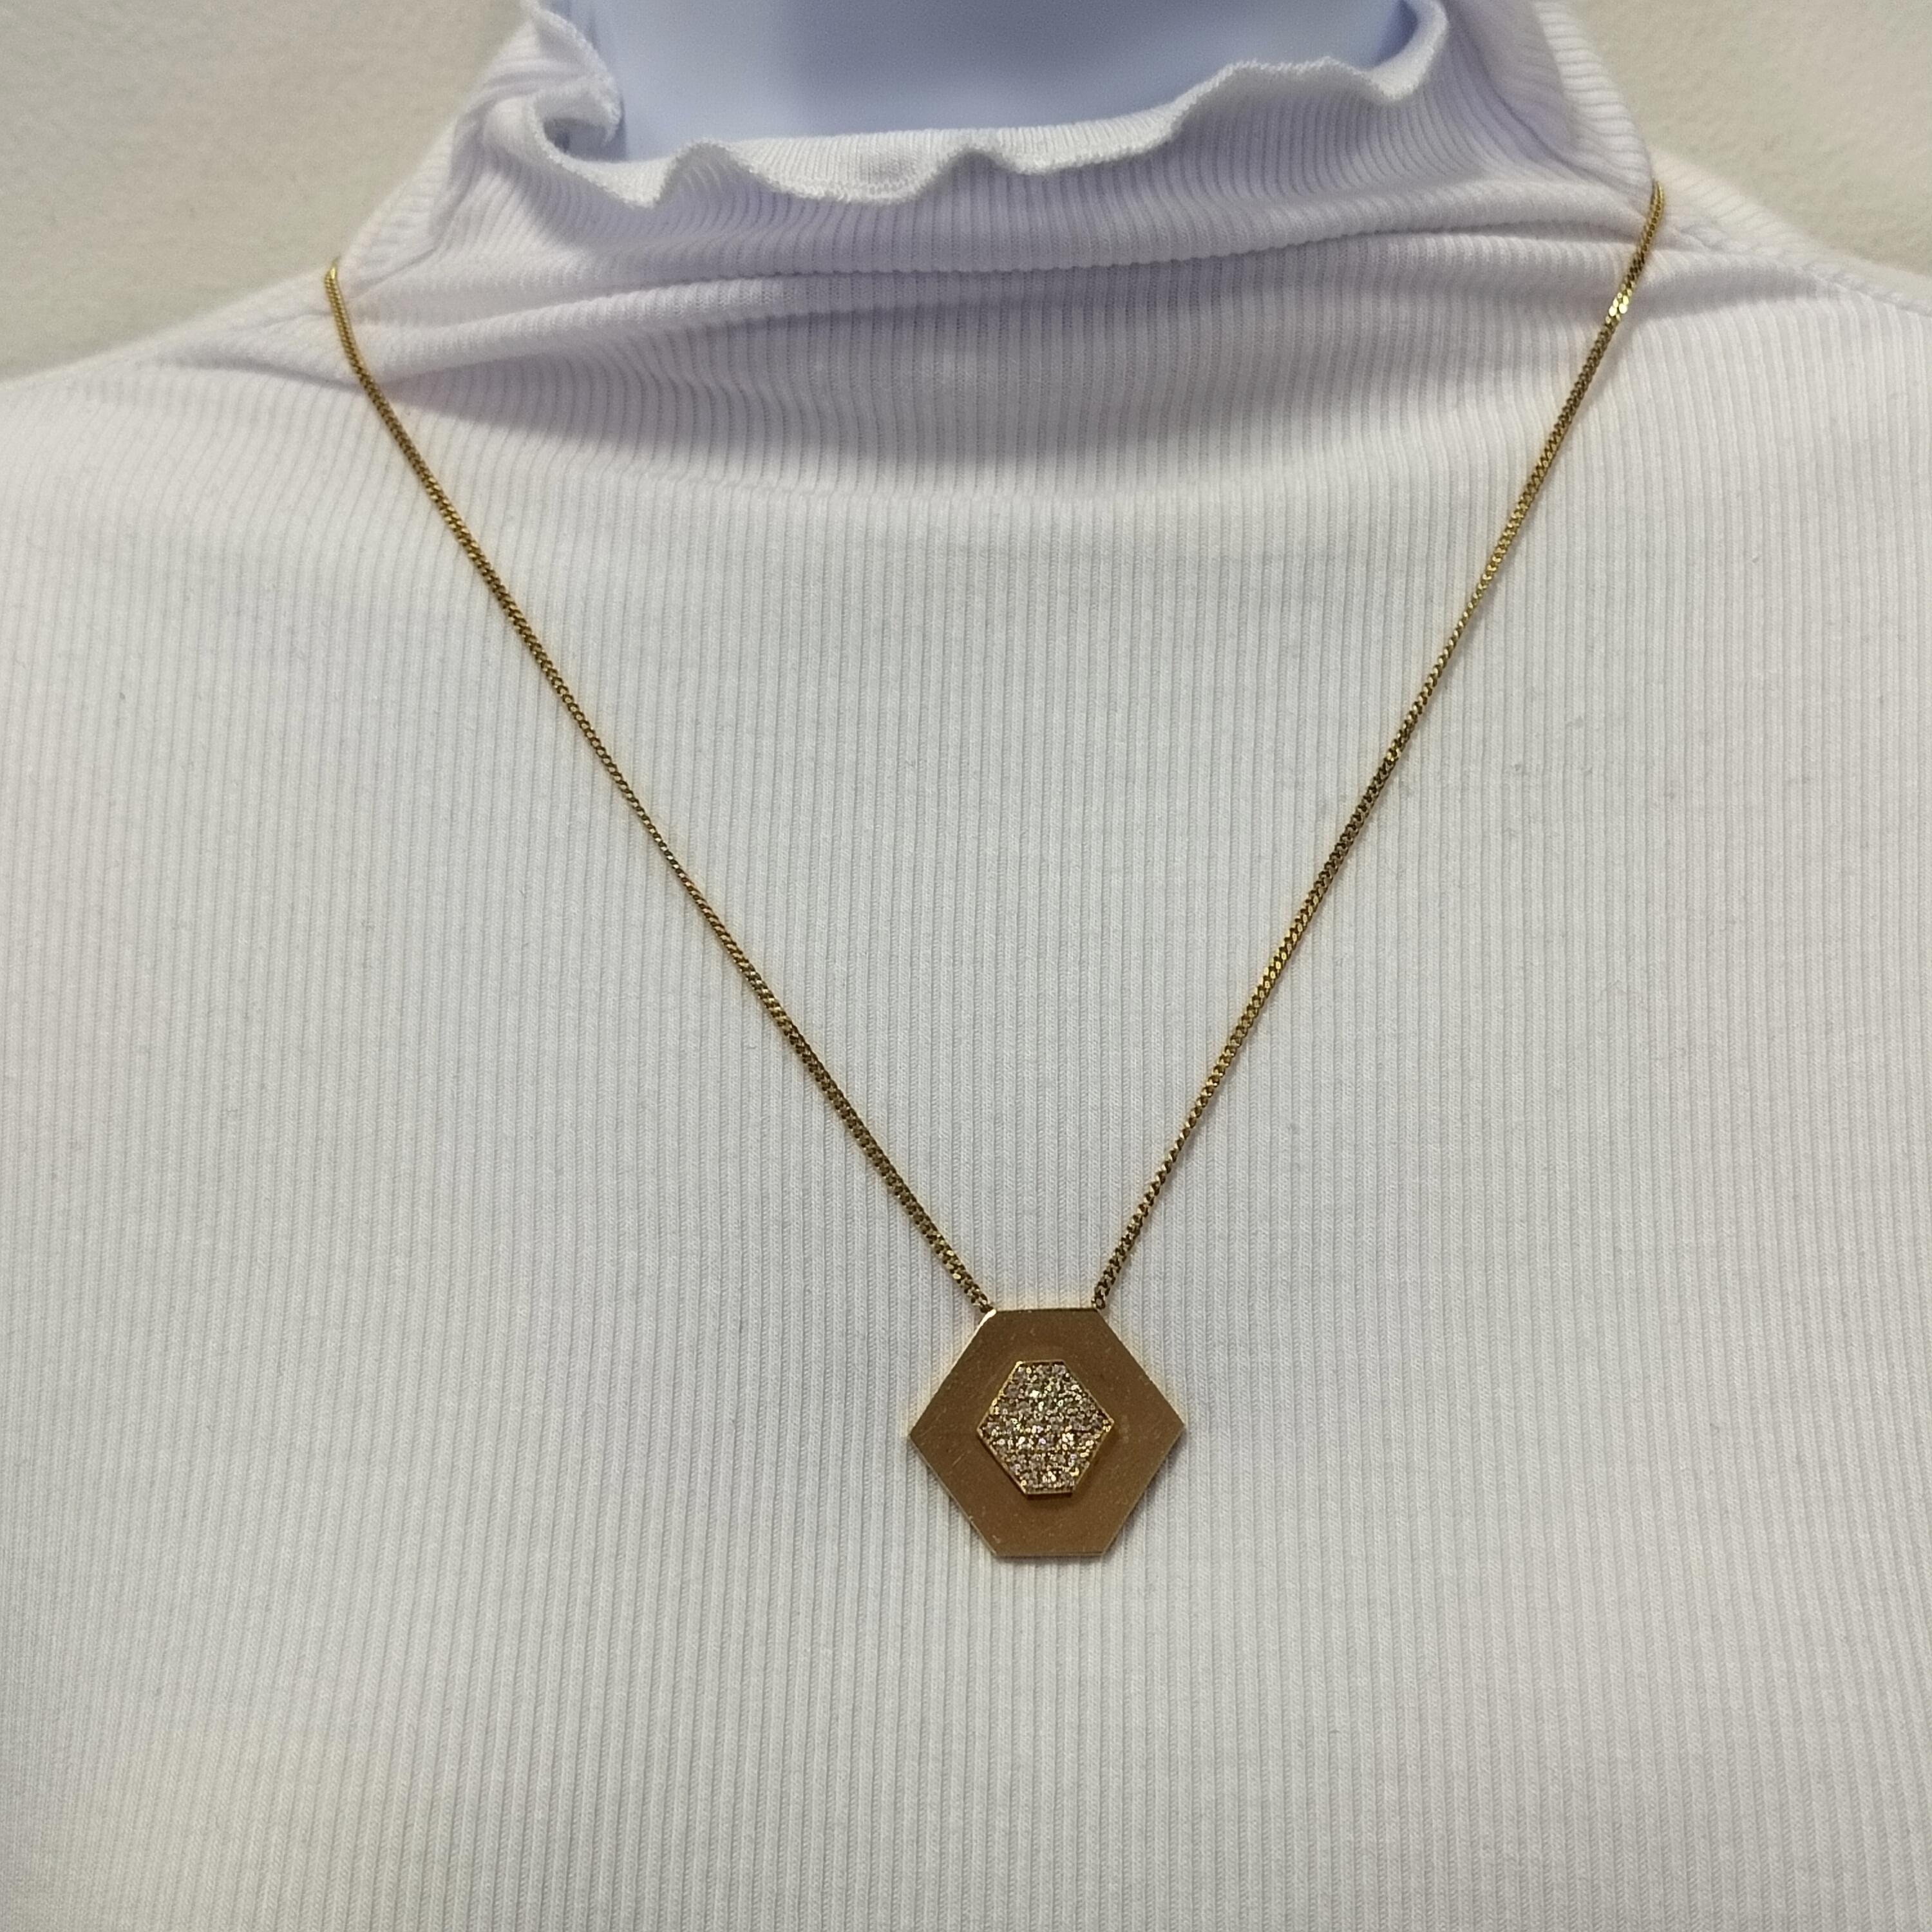 Beautiful estate Janis Savitt pendant necklace with good quality white diamond rounds.  This necklace has a nice weight to it, handmade in 18k yellow gold.  Length is 20